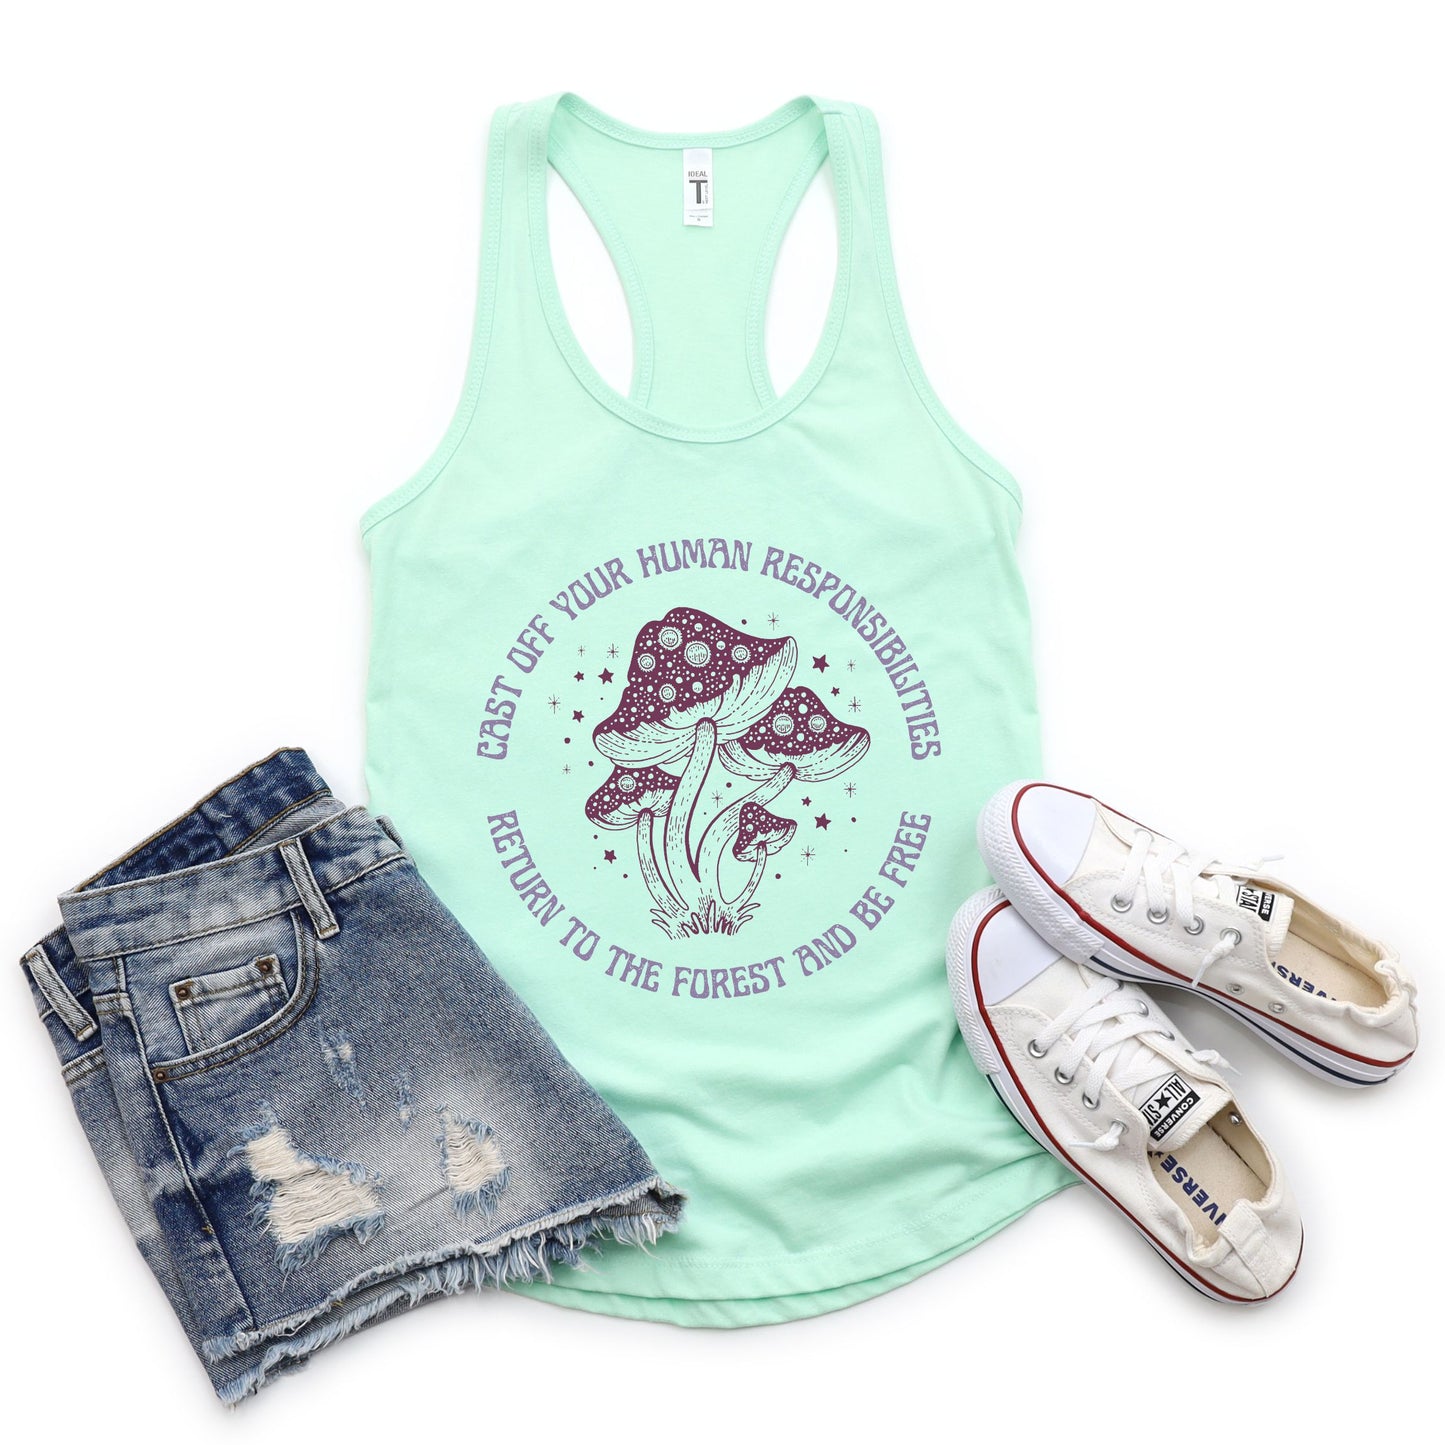 Cast Off Your Human Responsibilities Return to the Forest Women's Ideal Racerback Tank